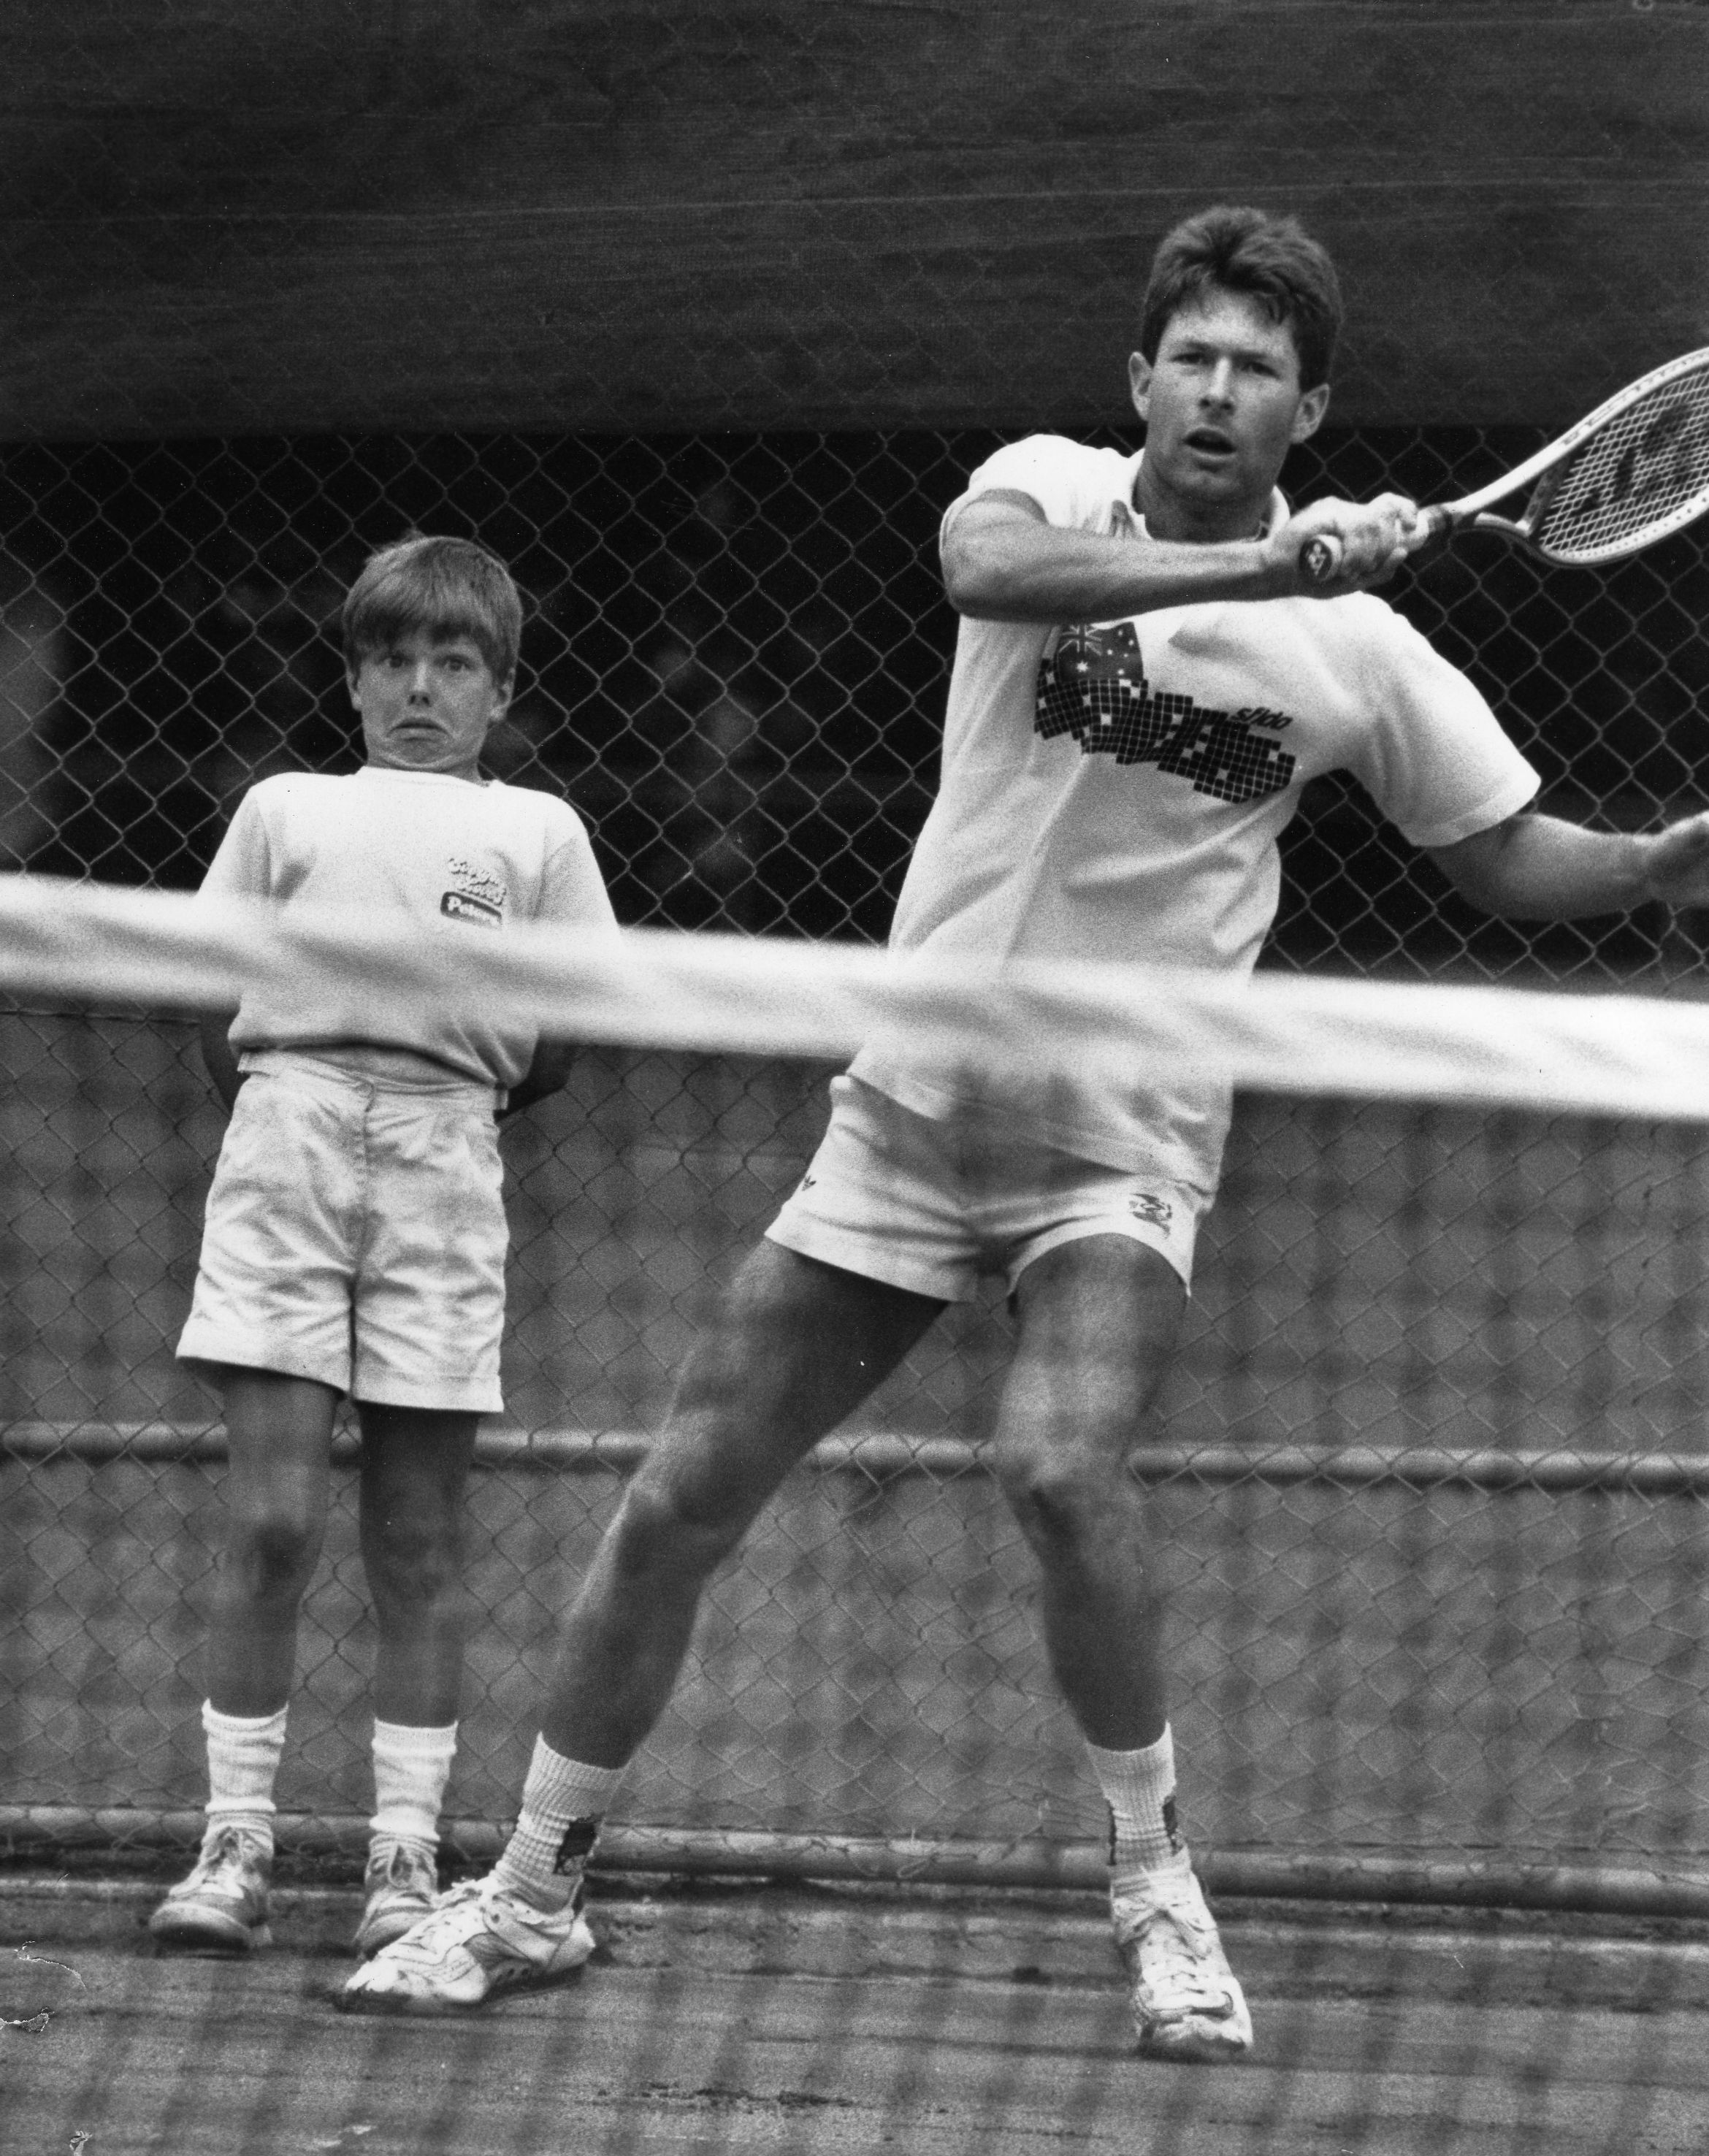 Ian Peter-Budge in the 1990 Victorian satellite masters final 
beating Todd Woodbridge 7/6,6/4